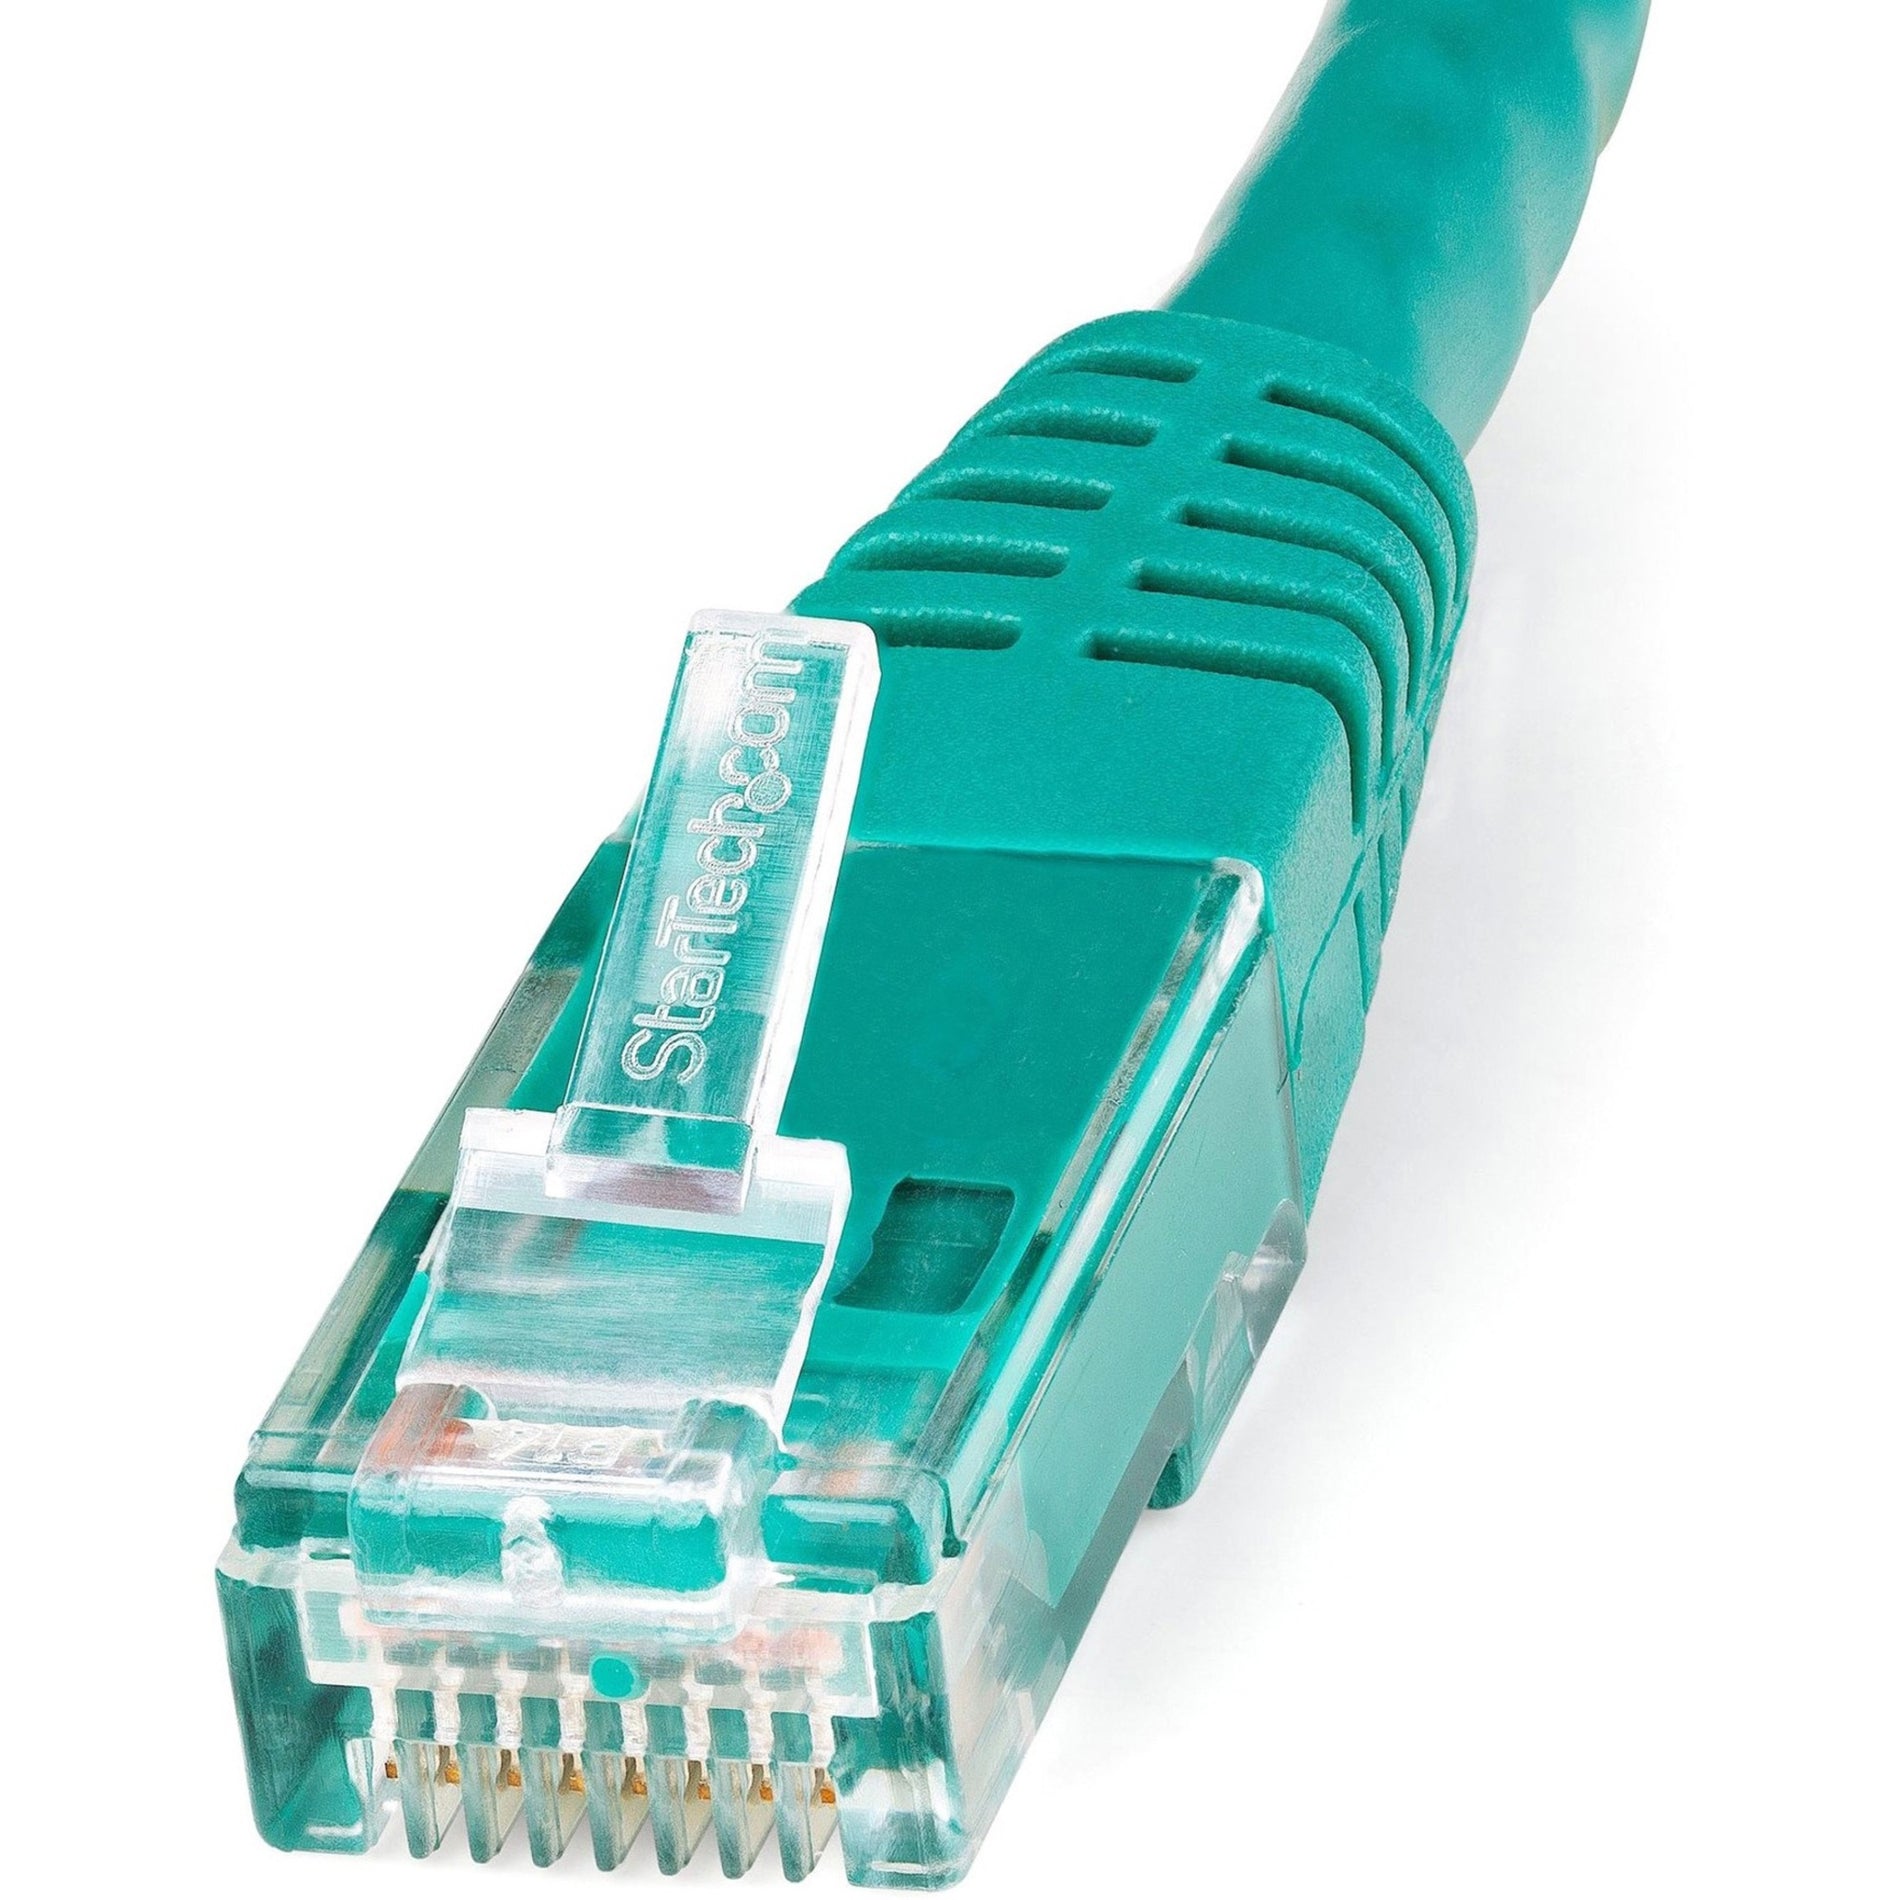 StarTech.com C6PATCH7GN 7ft Green Cat6 UTP Patch Cable ETL Verified, 10 Gbit/s Data Transfer Rate, Strain Relief